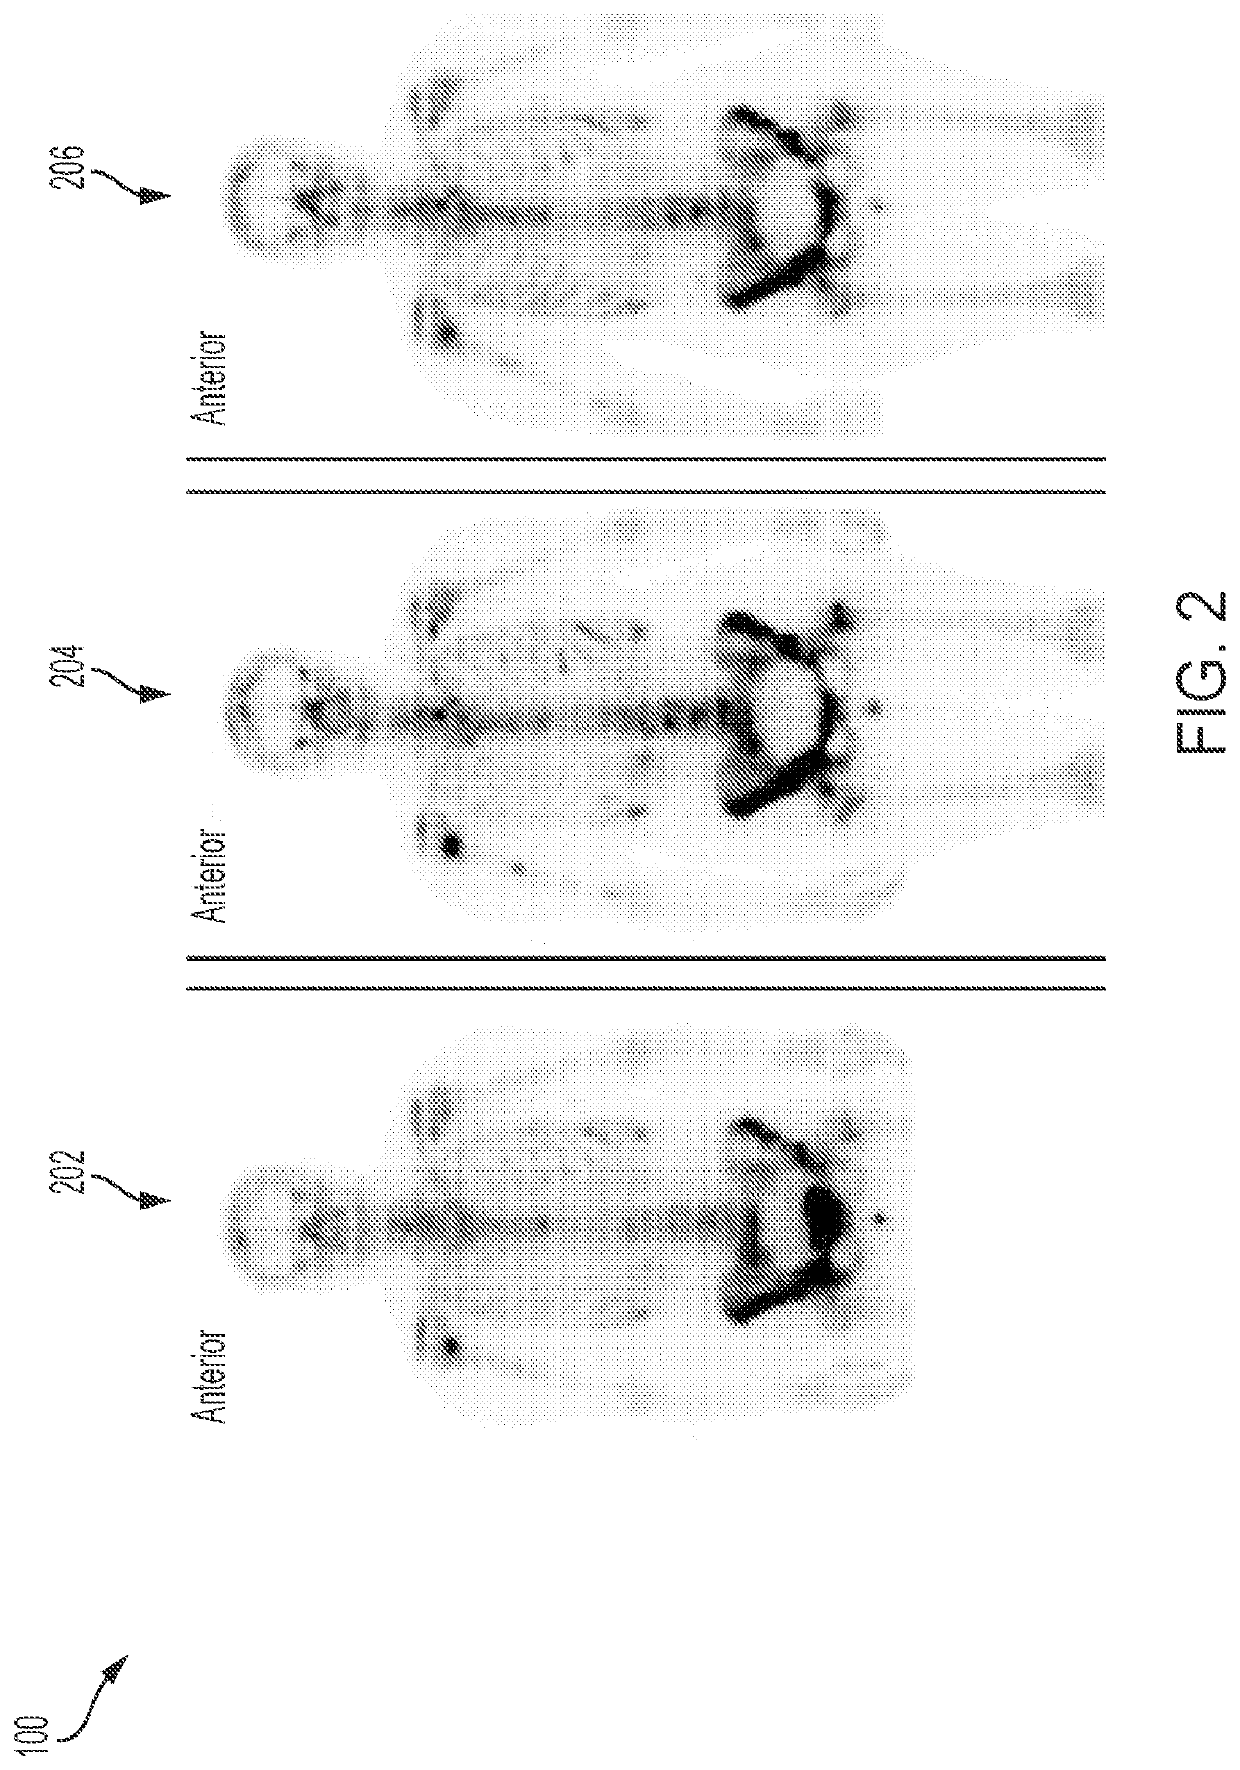 Systems and methods for interactive adjustment of intensity windowing in nuclear medicine images